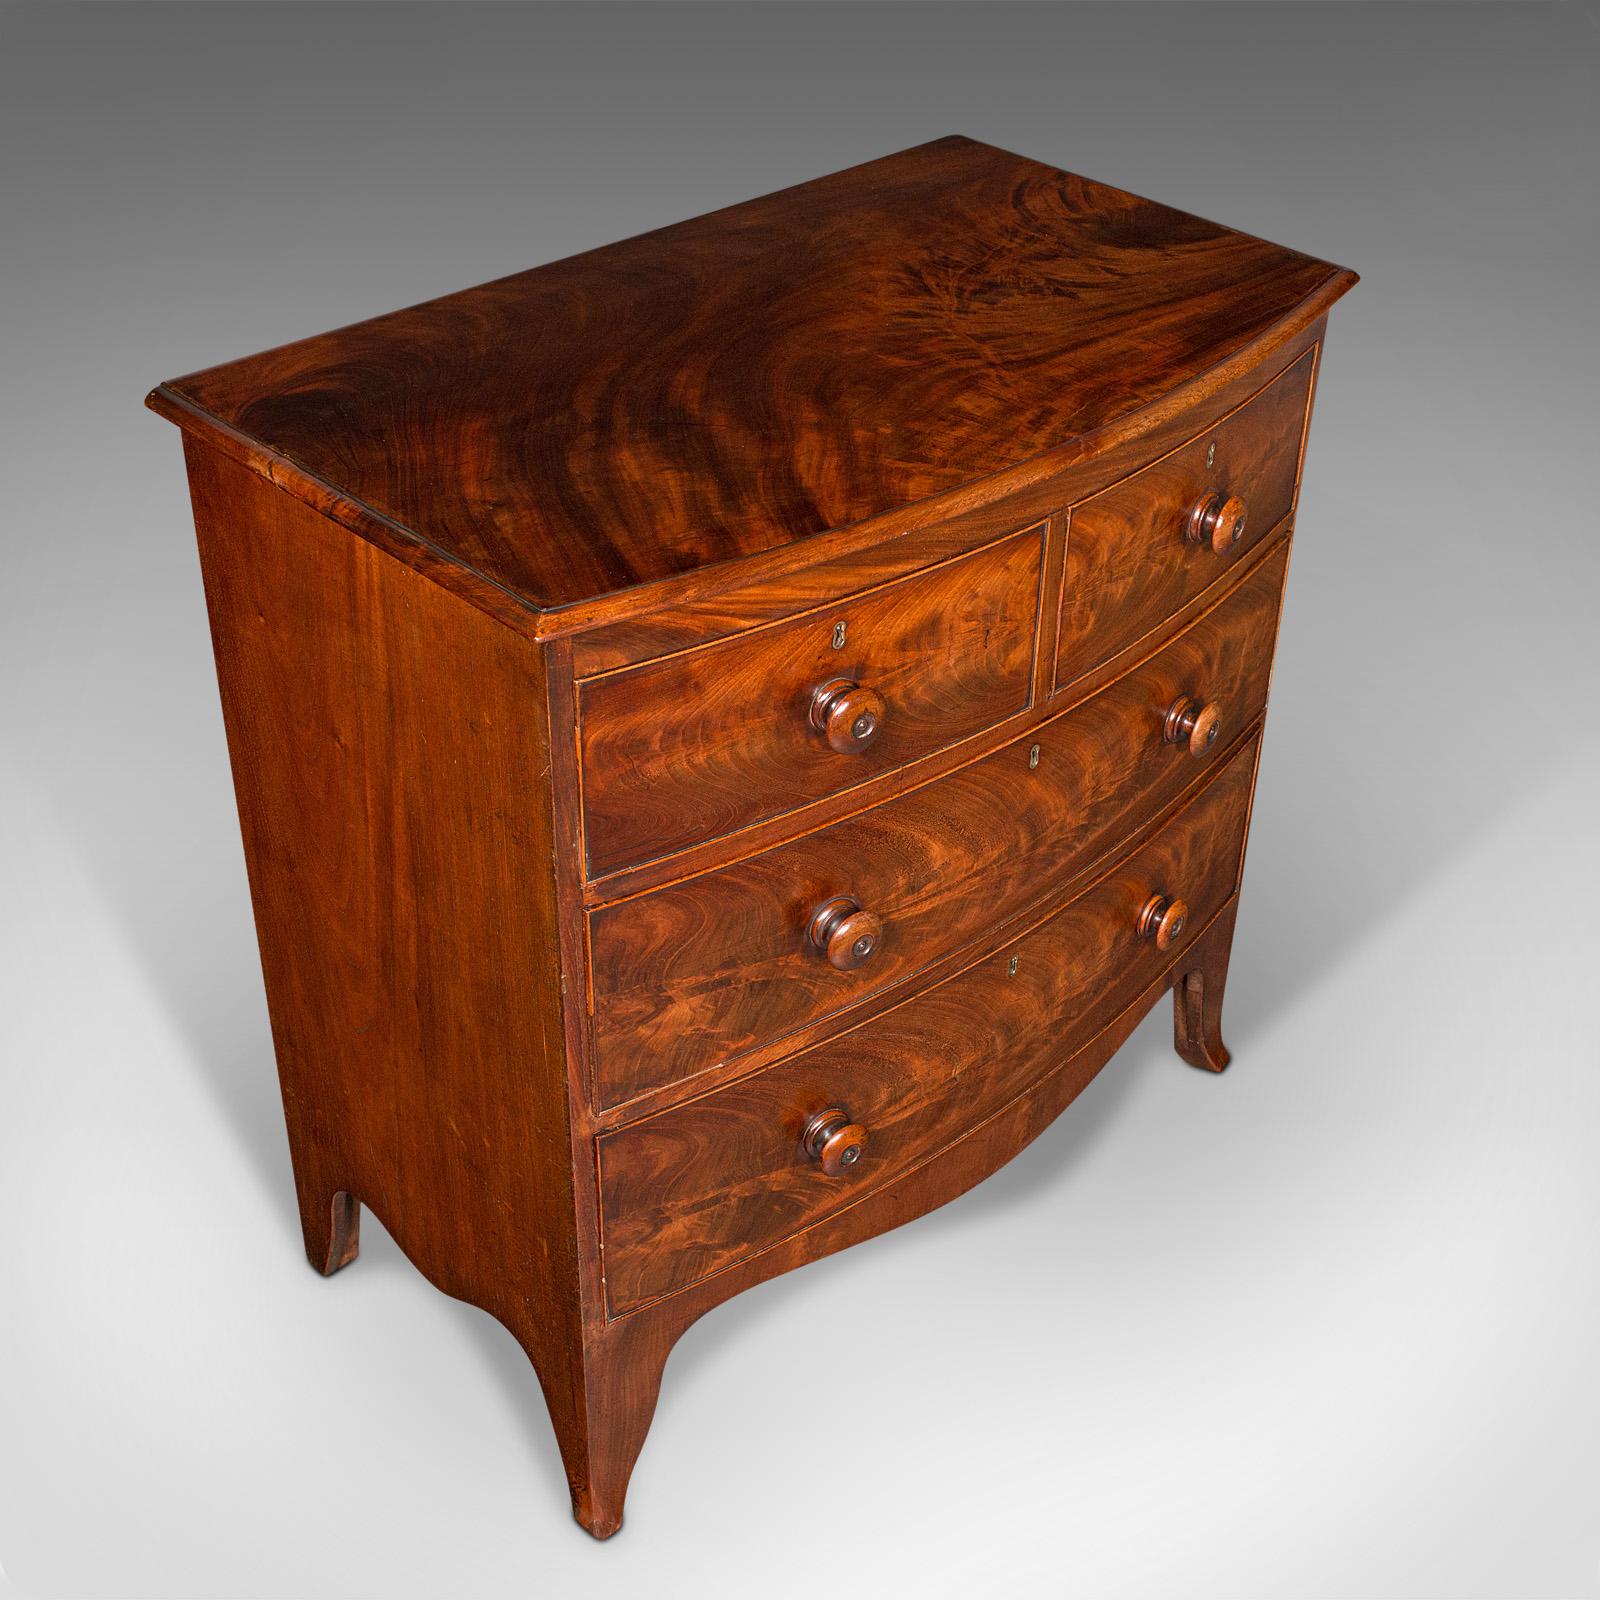 Wood Grand Antique Bow Front Chest of Drawers, English, Tallboy, Georgian, Circa 1780